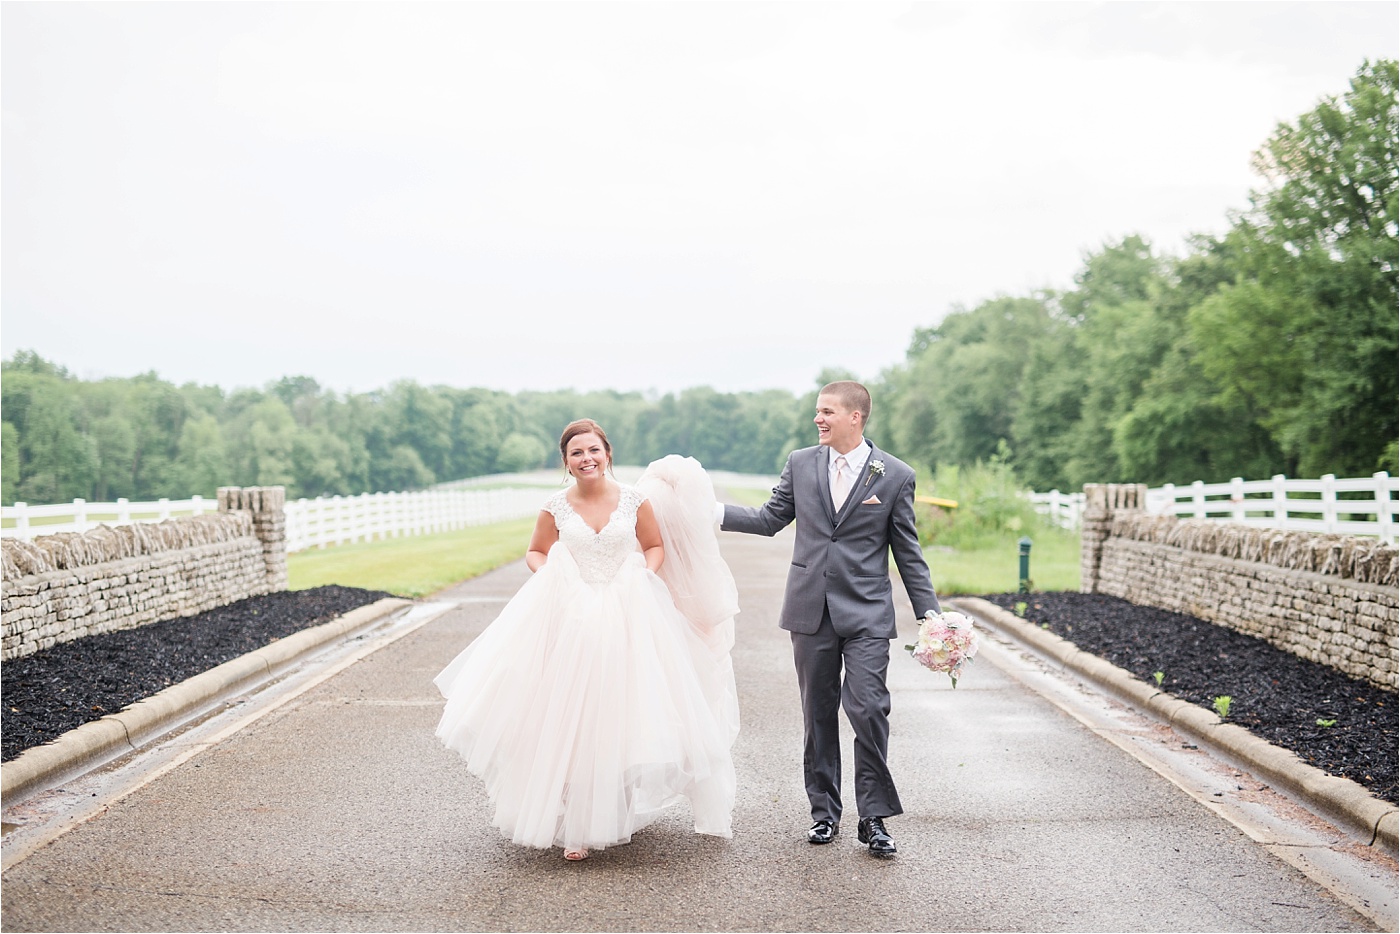 A Blush Outdoor wedding at Irongate Equestrian | KariMe Photography_0153